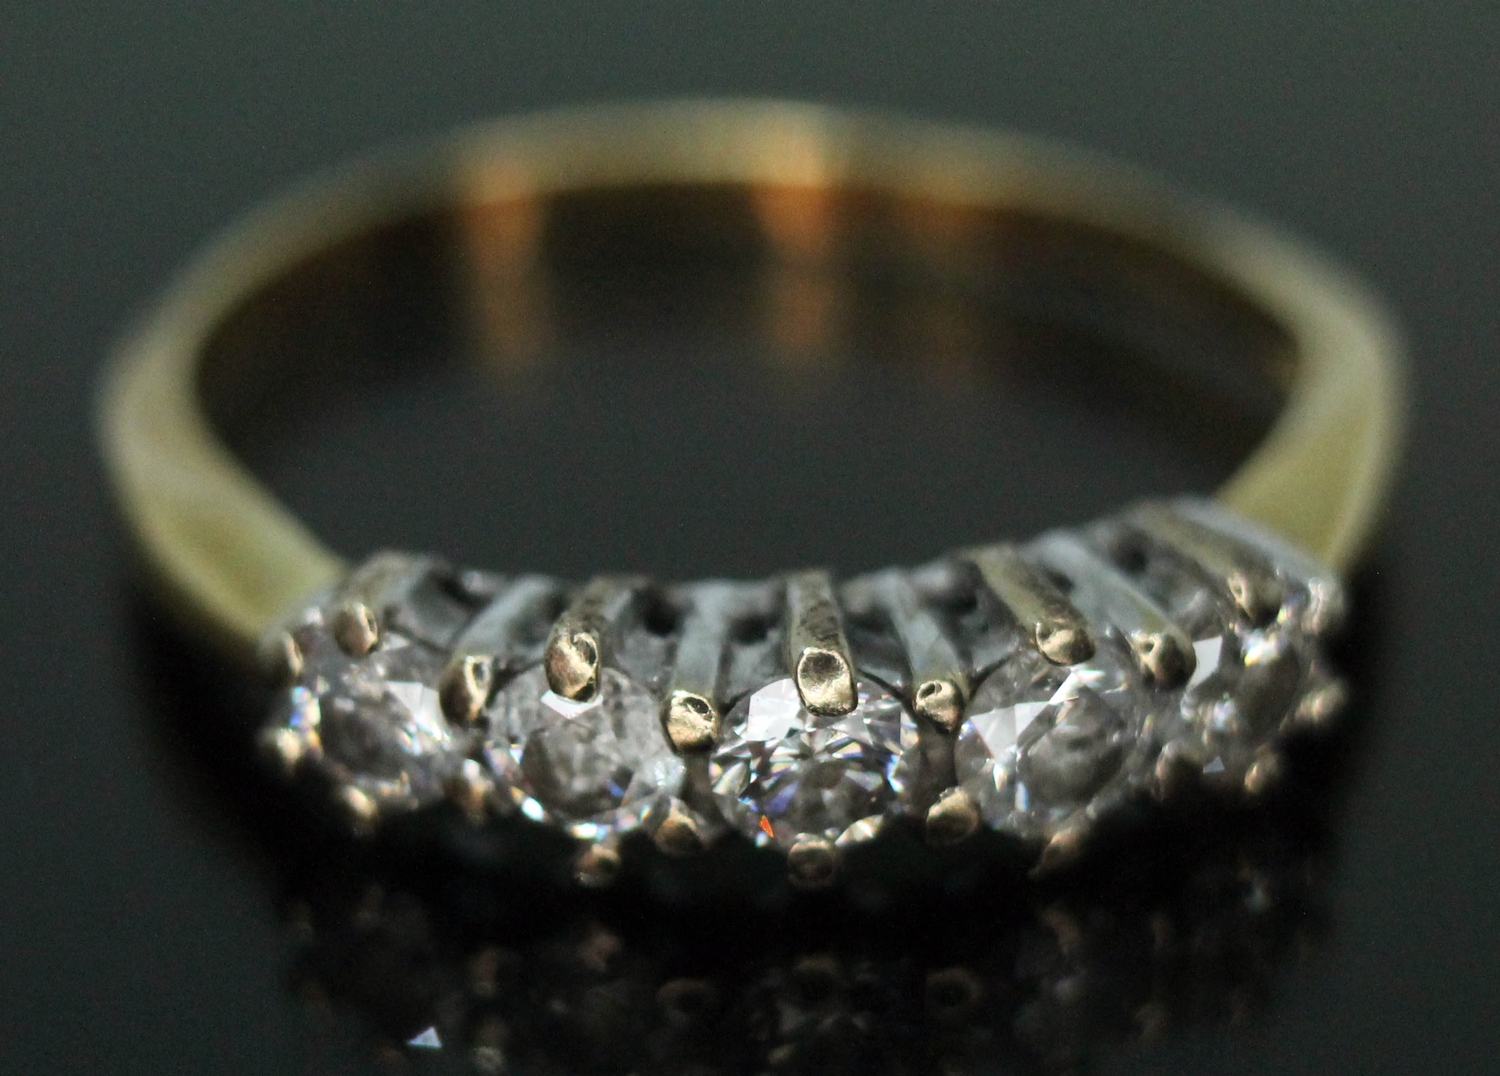 A five stone diamond ring, 18ct gold import marks, gross wt. 2.03g, size K (band bent).